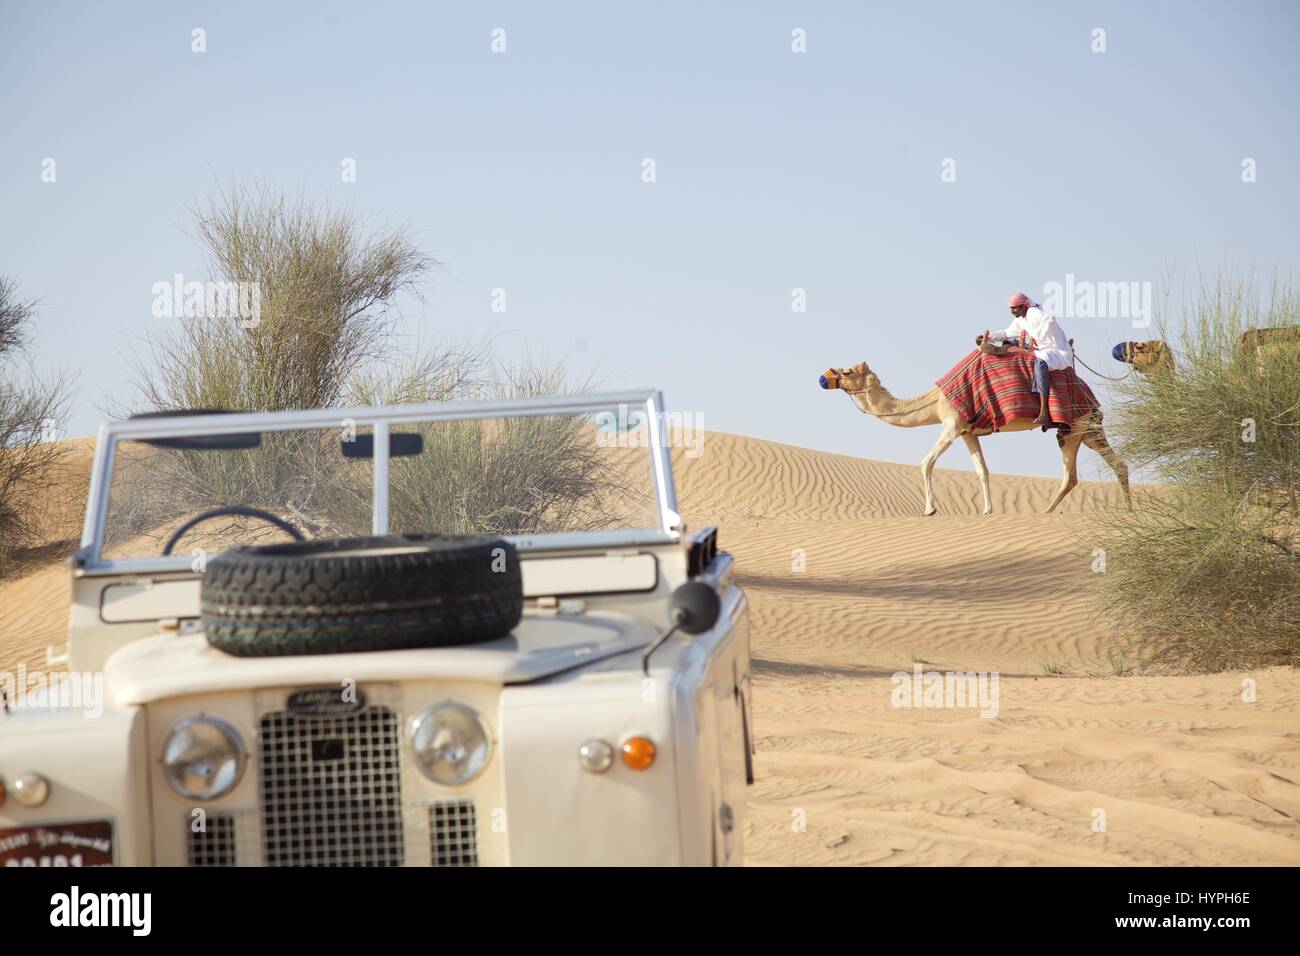 Camels walking behind Landrover Defenders in the desert near Dubai Stock Photo